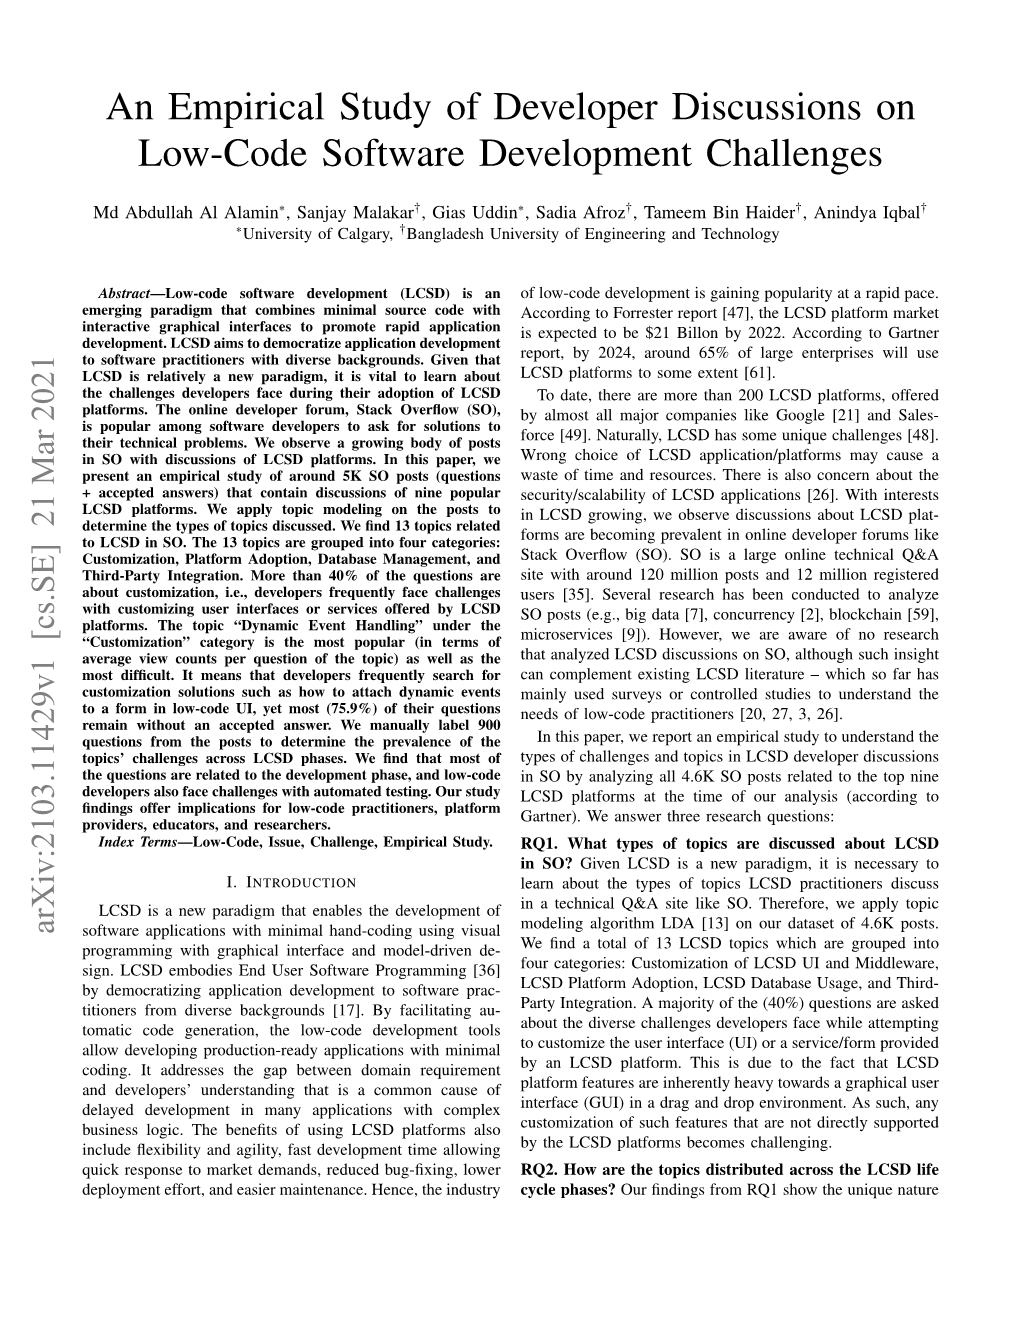 An Empirical Study of Developer Discussions on Low-Code Software Development Challenges